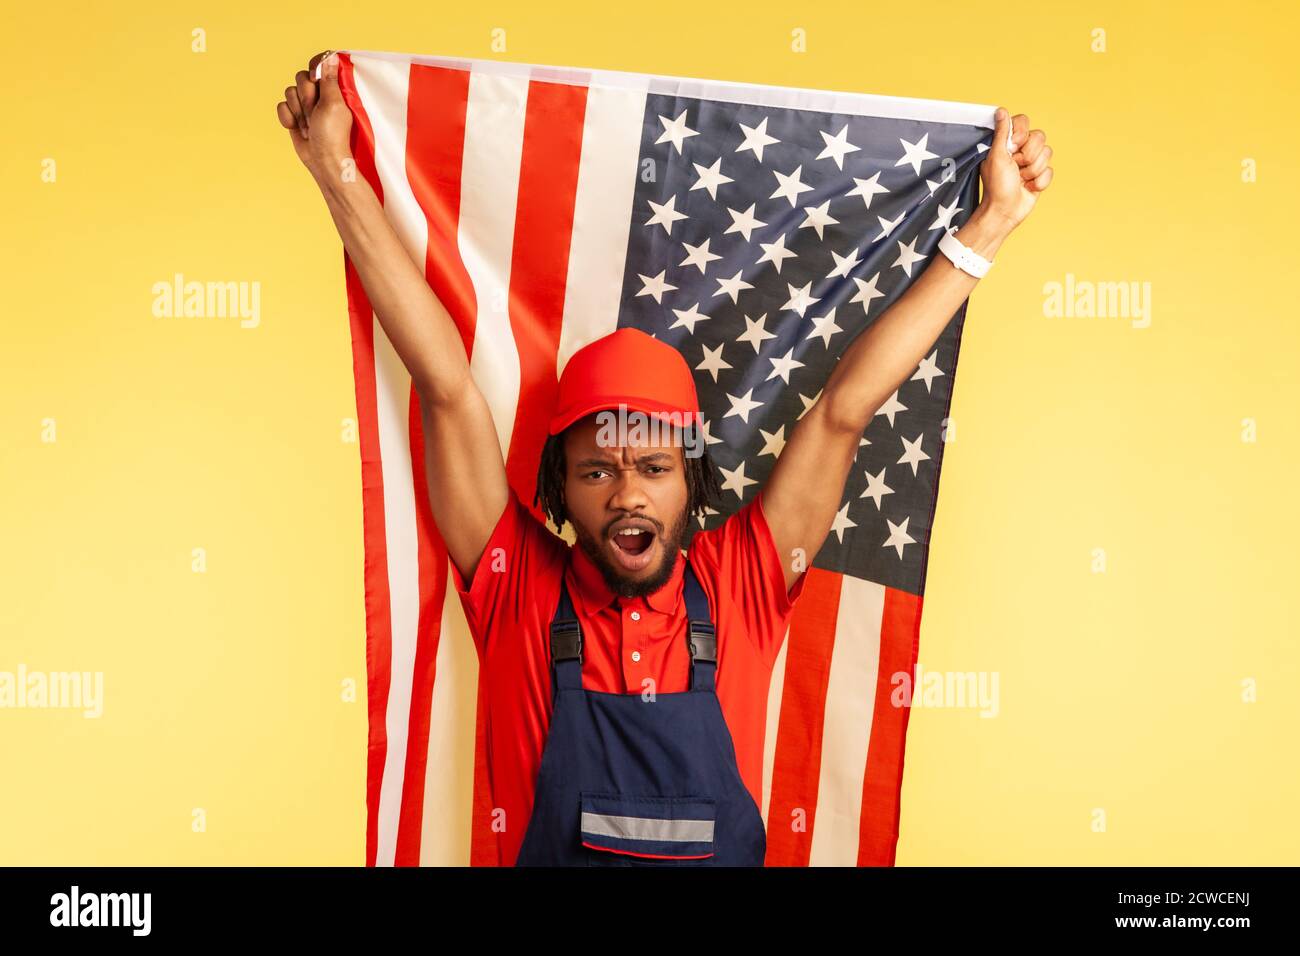 Serious afro-american worker in uniform with dreadlocks holding American flag and screaming, celebrating freedom and independence. Indoor studio shot Stock Photo